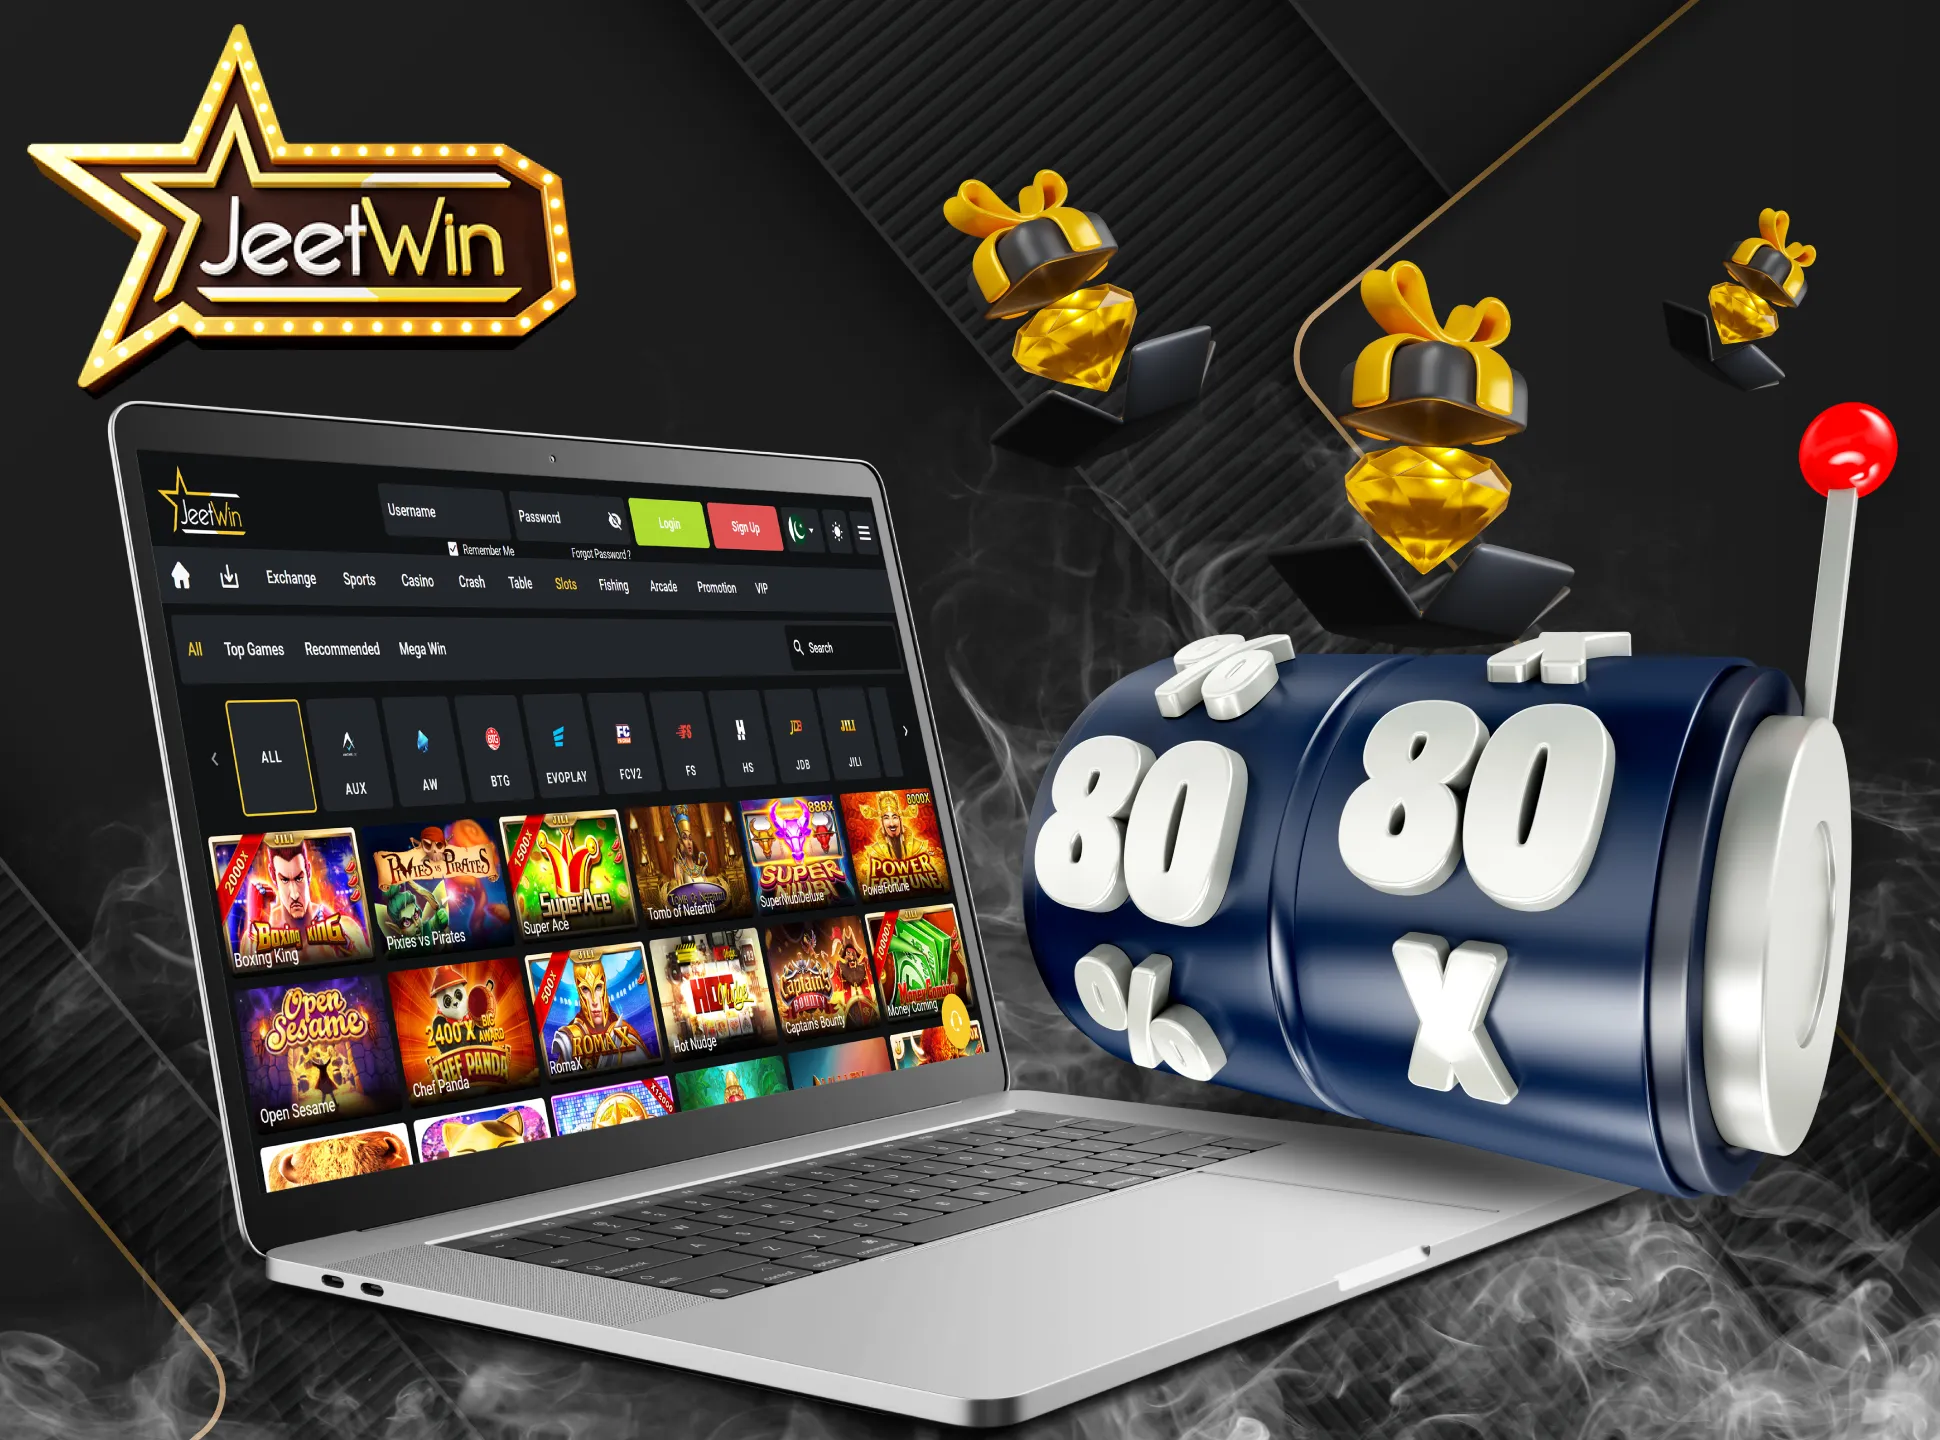 Check out the most popular slots on the JeetWin website.